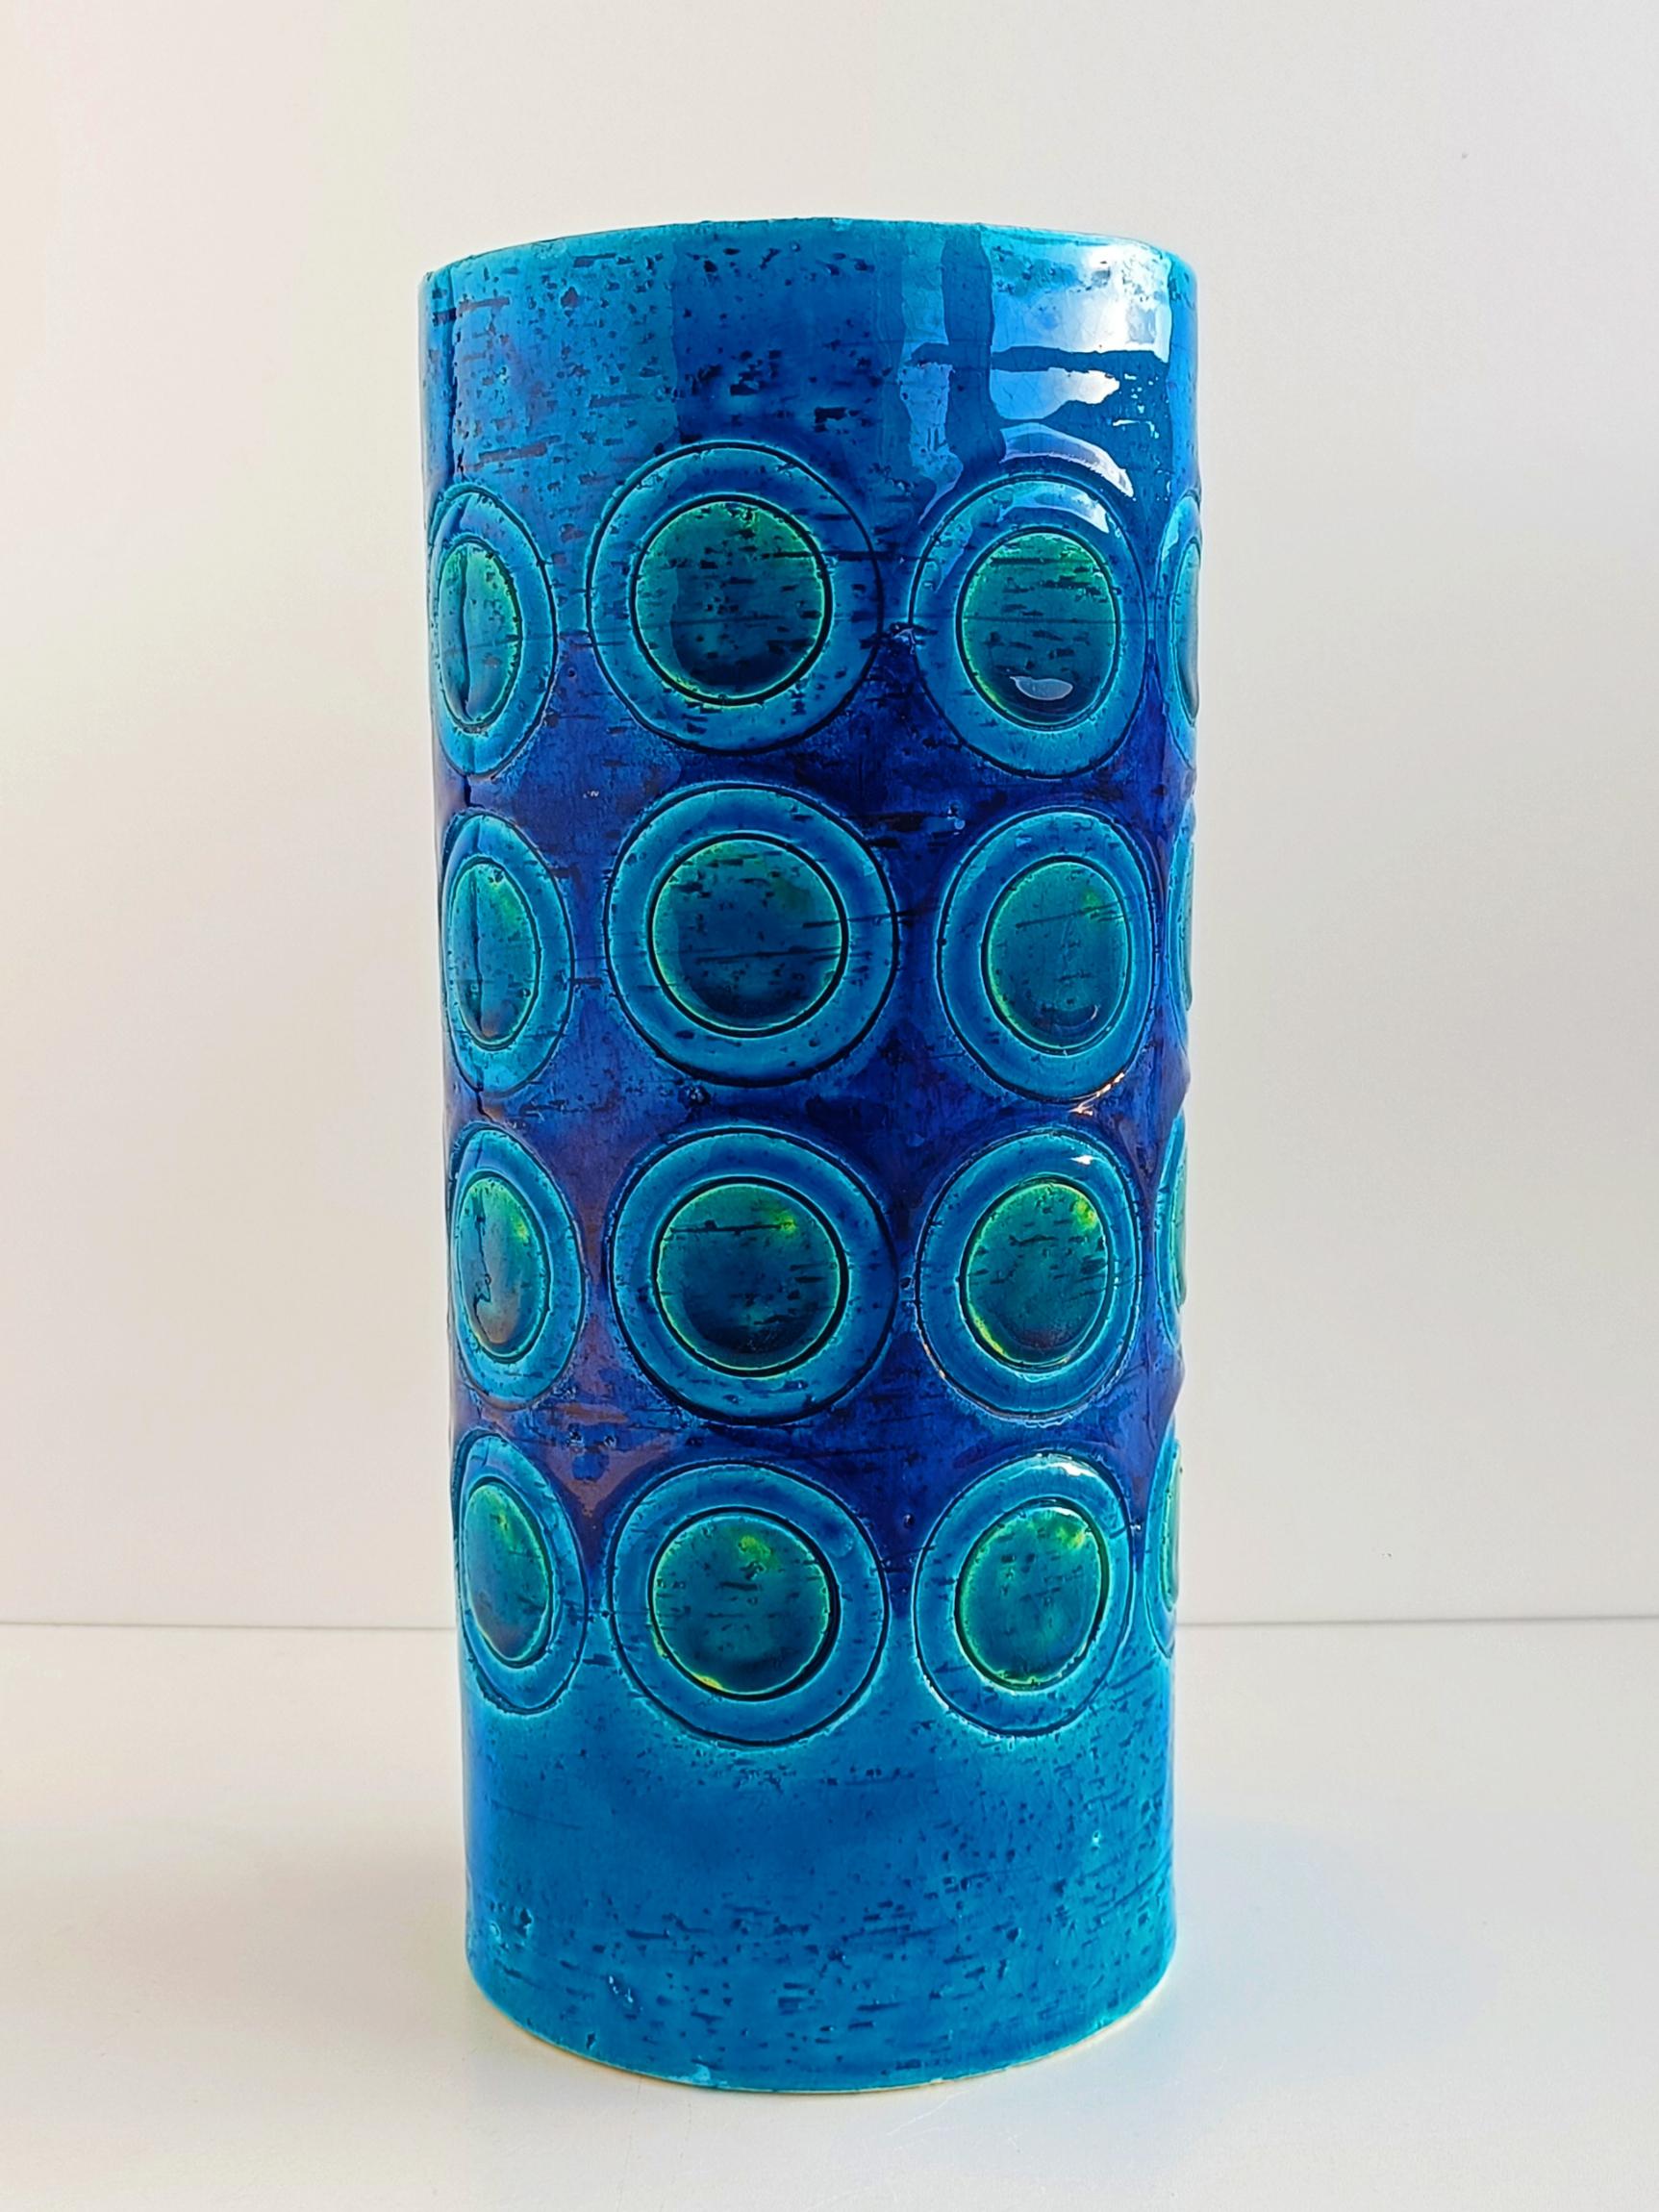 Ikano decor Rimini Blu by Aldo Londi for Bitossi ceramic vase, a highly sought-after vintage collectors item. It features the unique rough surface and the stunning blue and green colors so characteristic of the Bitossi Rimini Blu production during